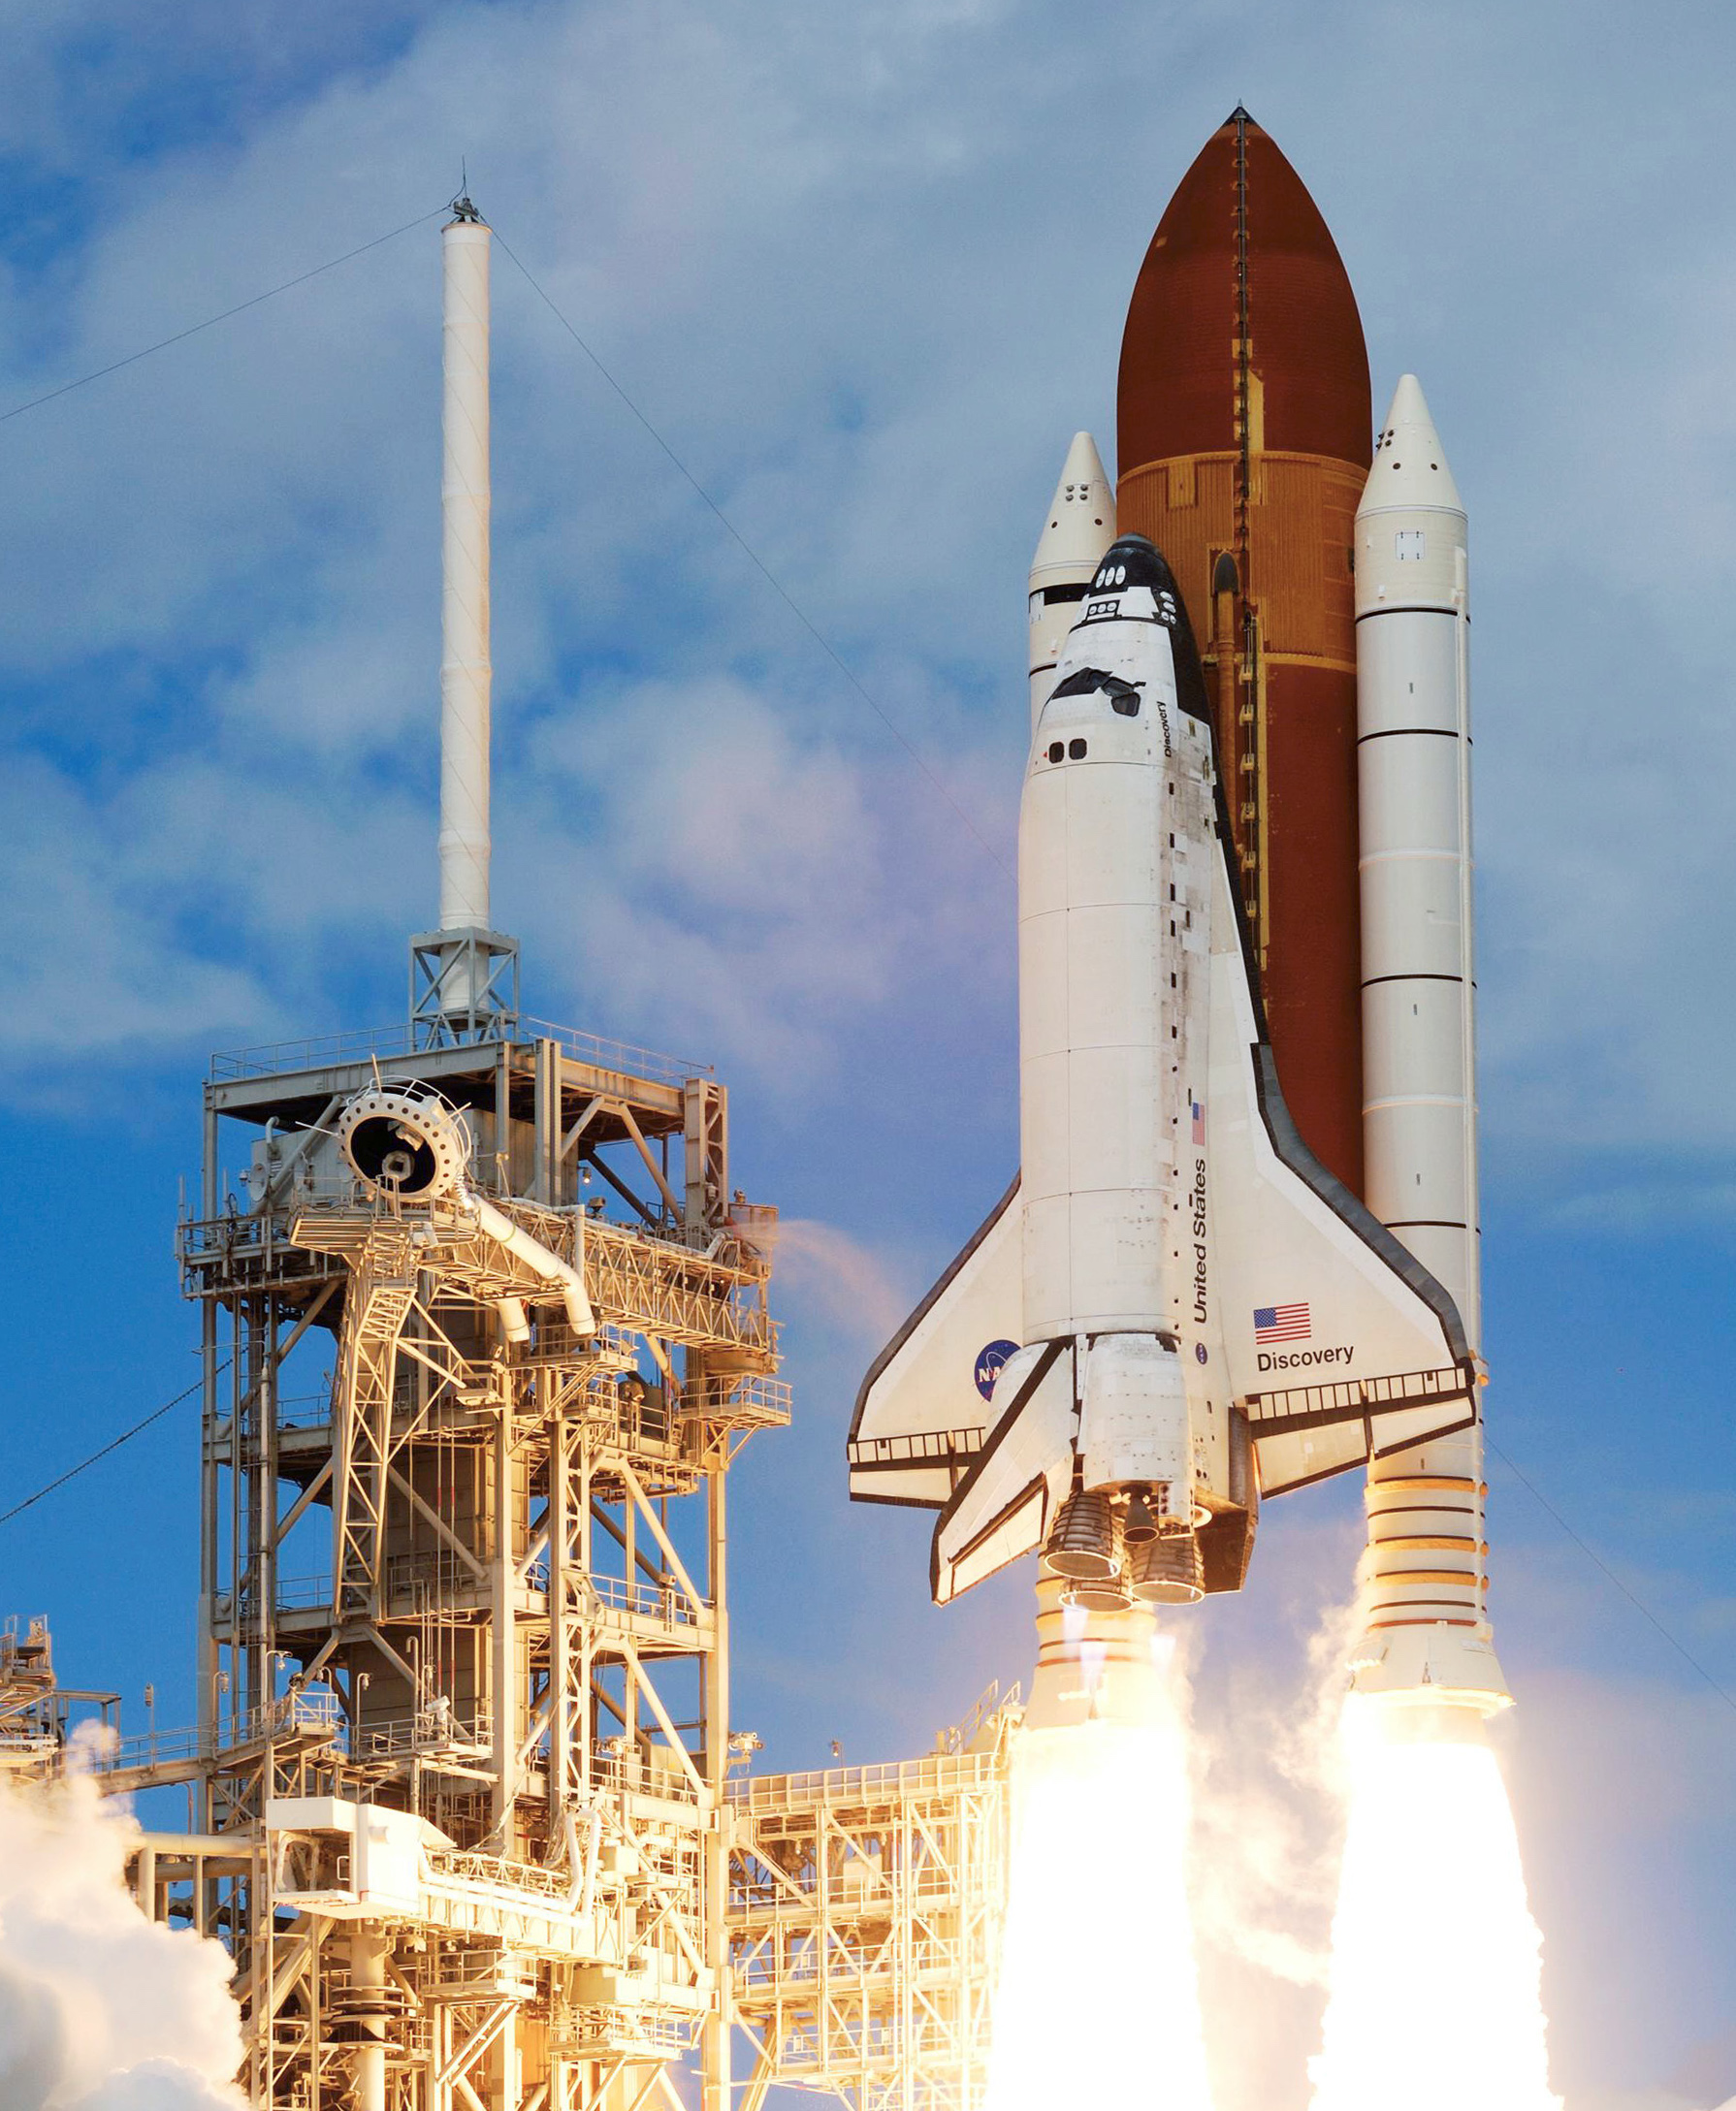 The white space shuttle lifting off of the platform attached to the red and white rockets.